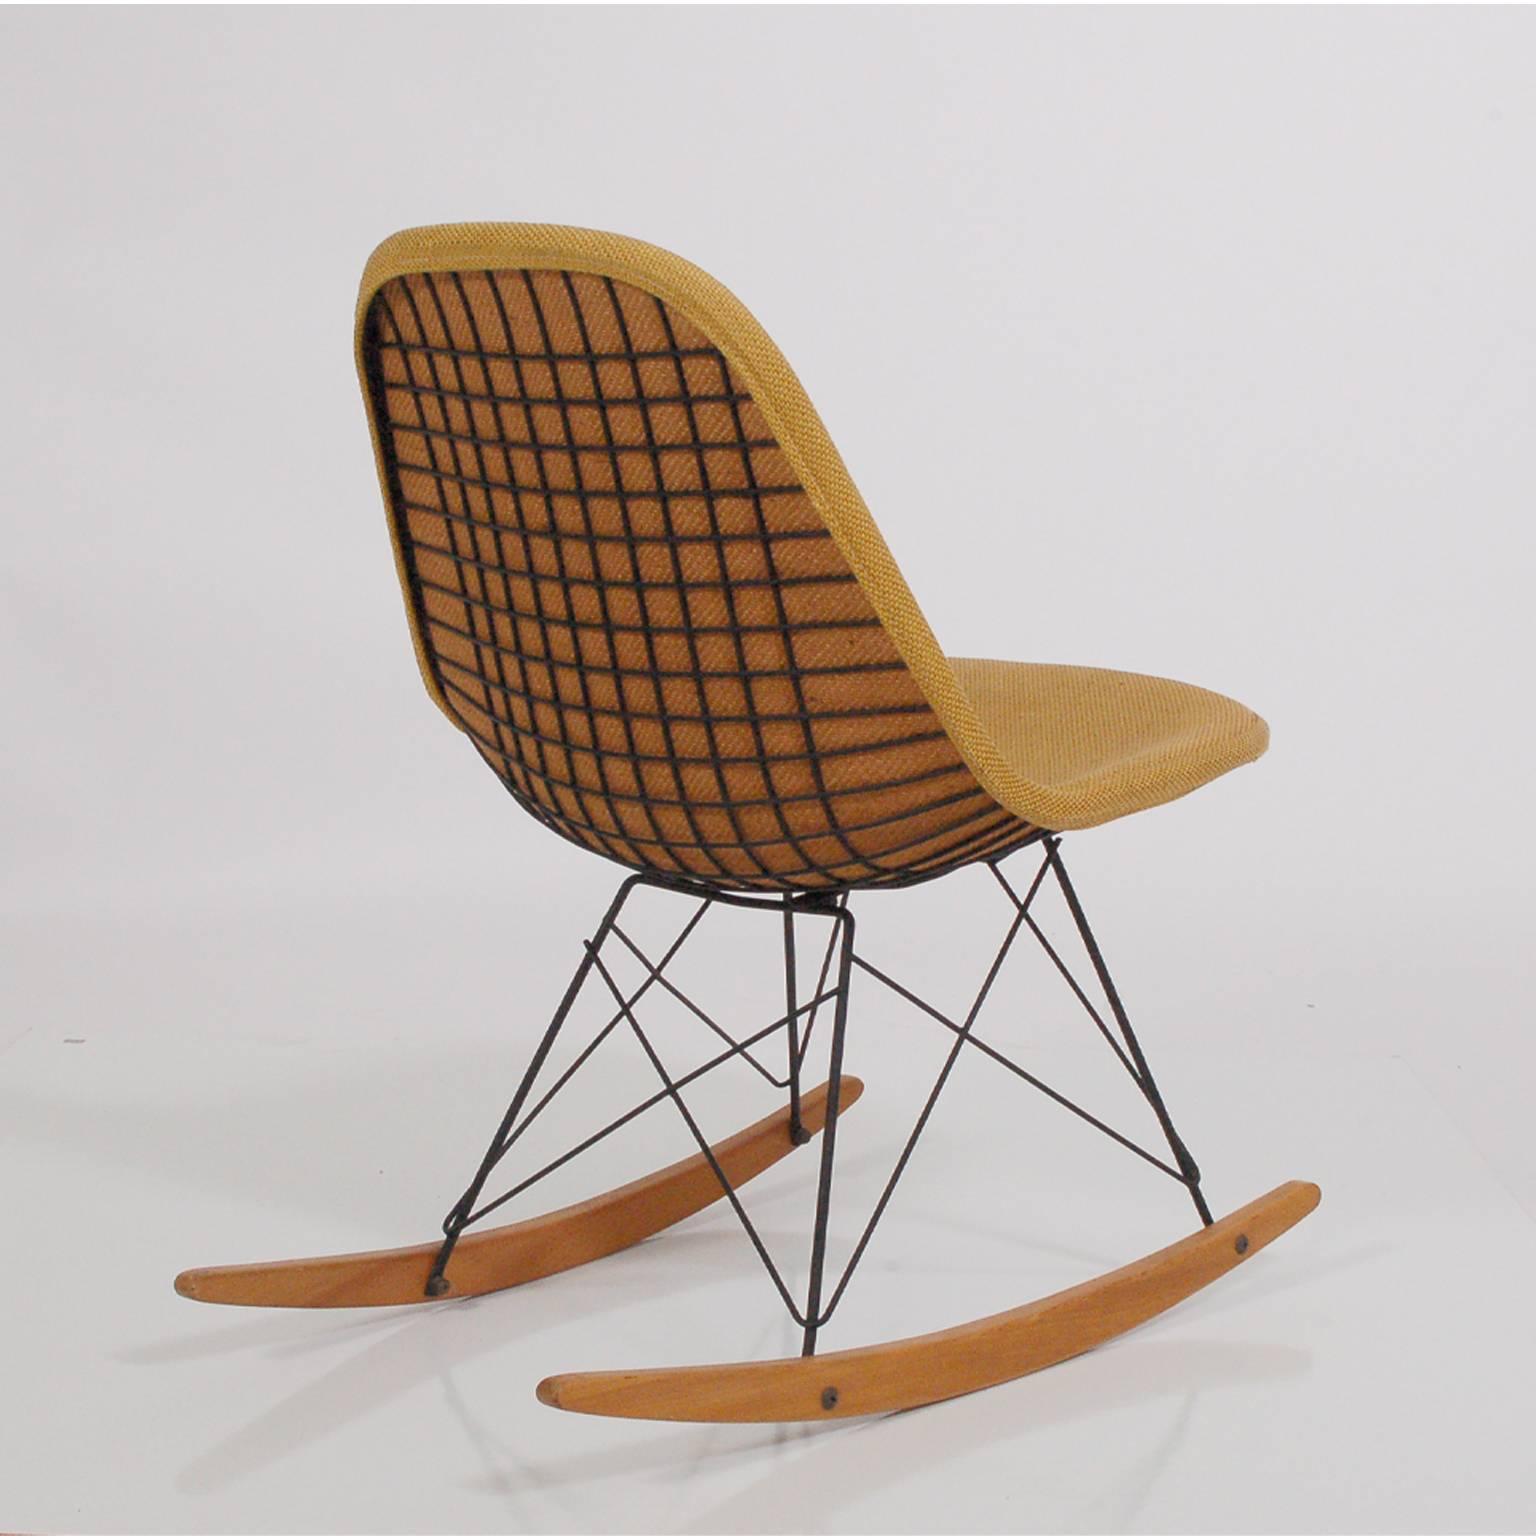 All original, early rocker, black wire frame with birch struts, original fabric upholstered cover. This rocker has been on the carpet all its life. Paper tag is retained, with Herman Miller Furniture Co., Venice CA. Beautiful museum condition.